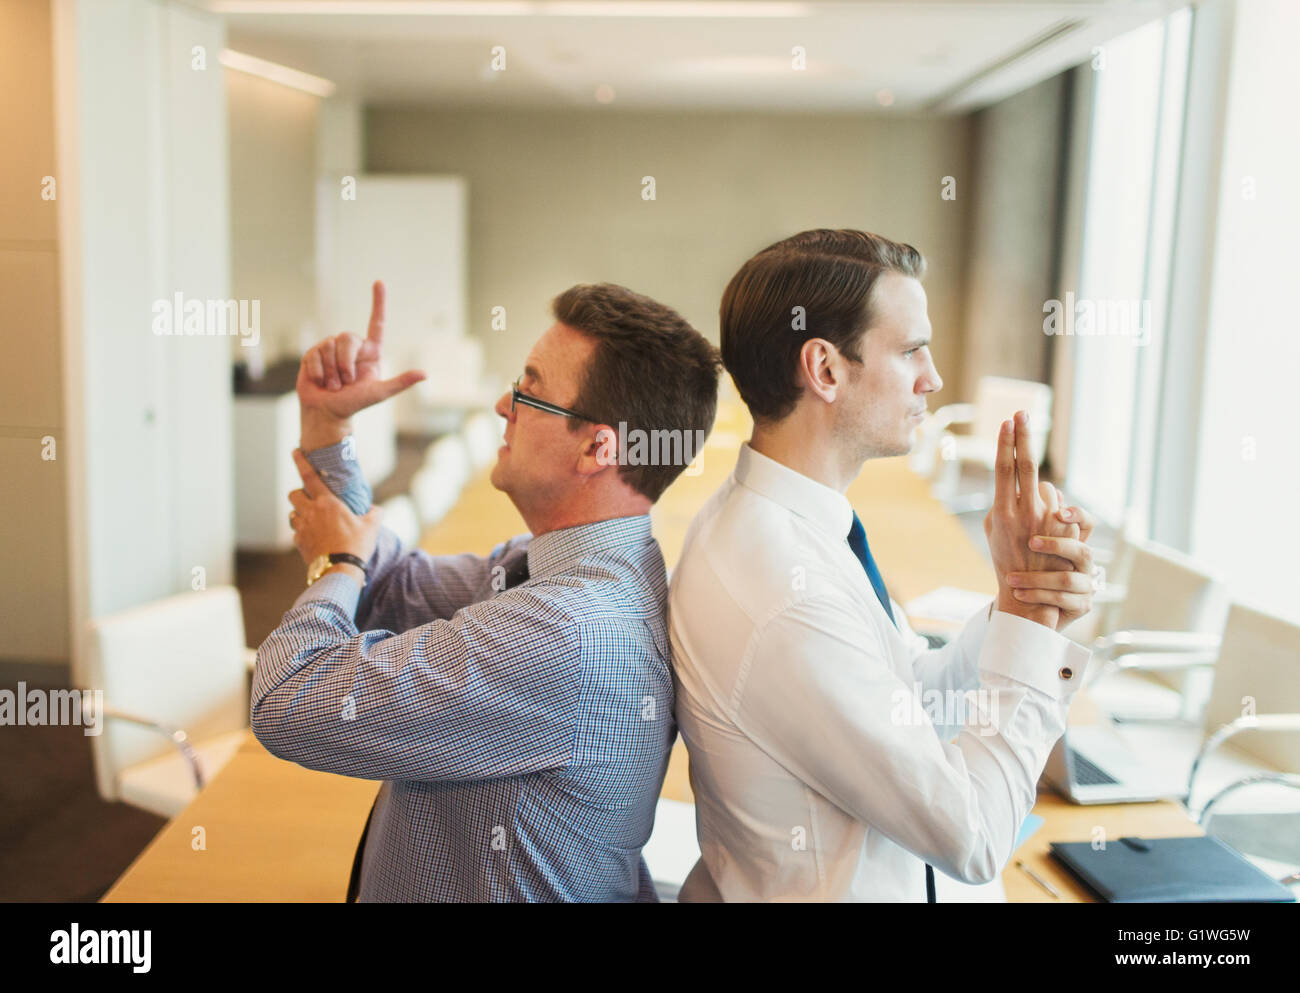 Playful businessmen pretending to duel back to back in conference room Stock Photo